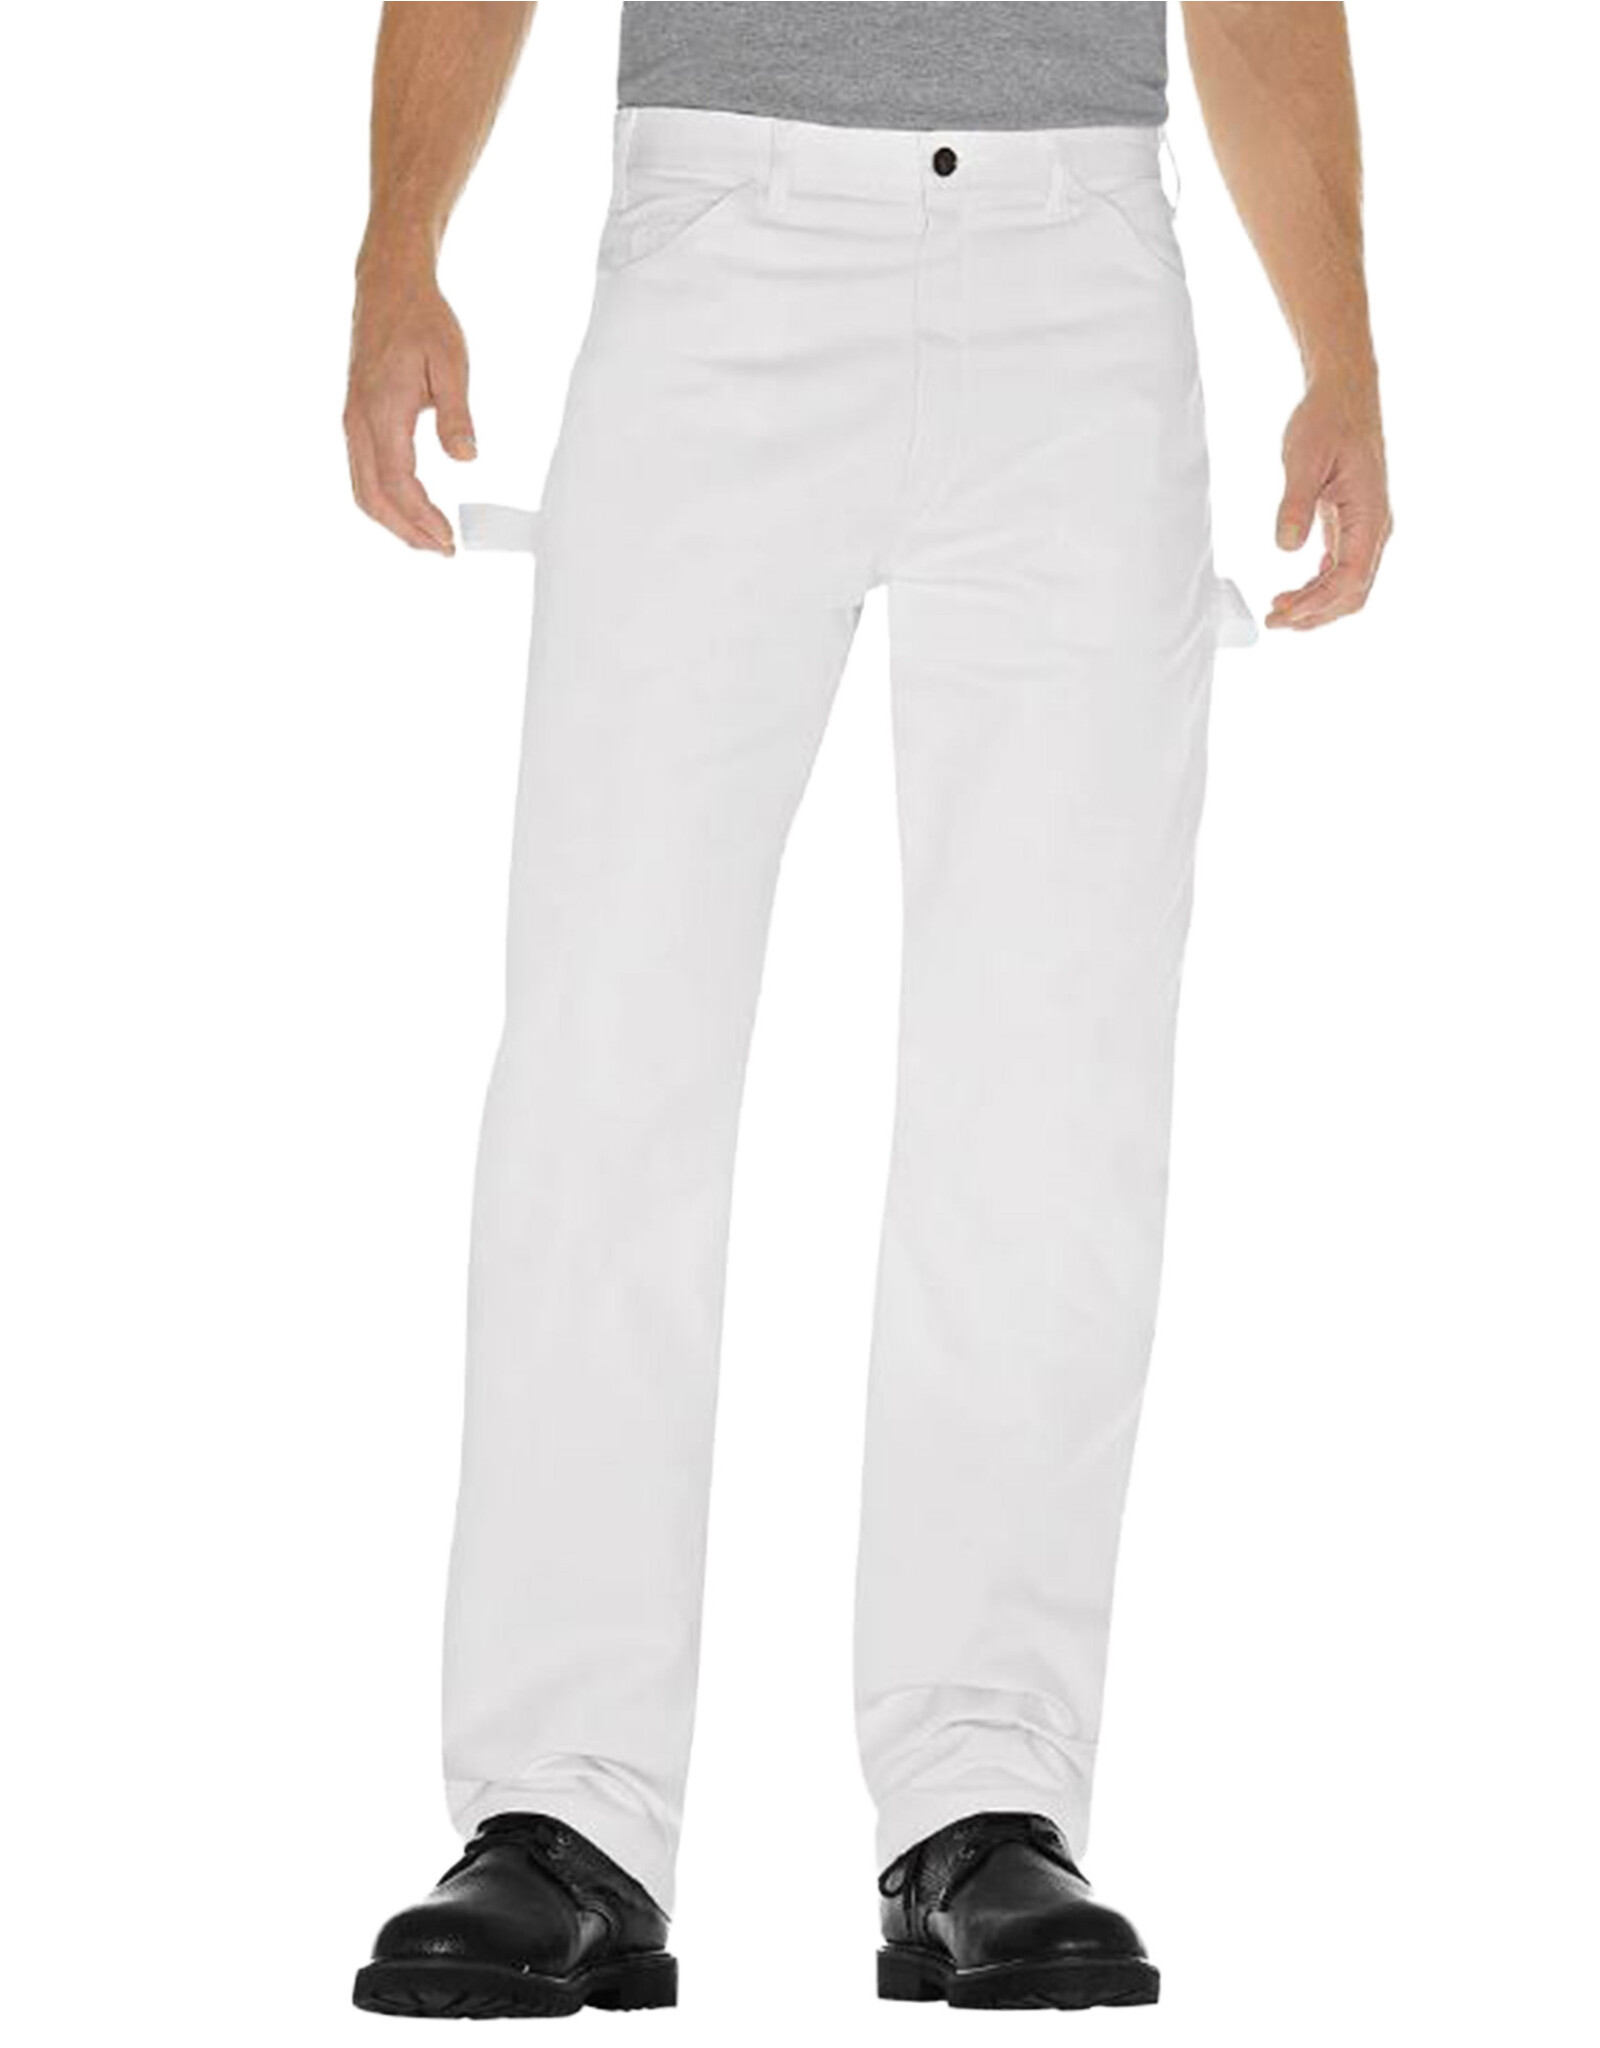 DICKIES Relaxed Fit Painter's Pant Utility White - 1953CWH